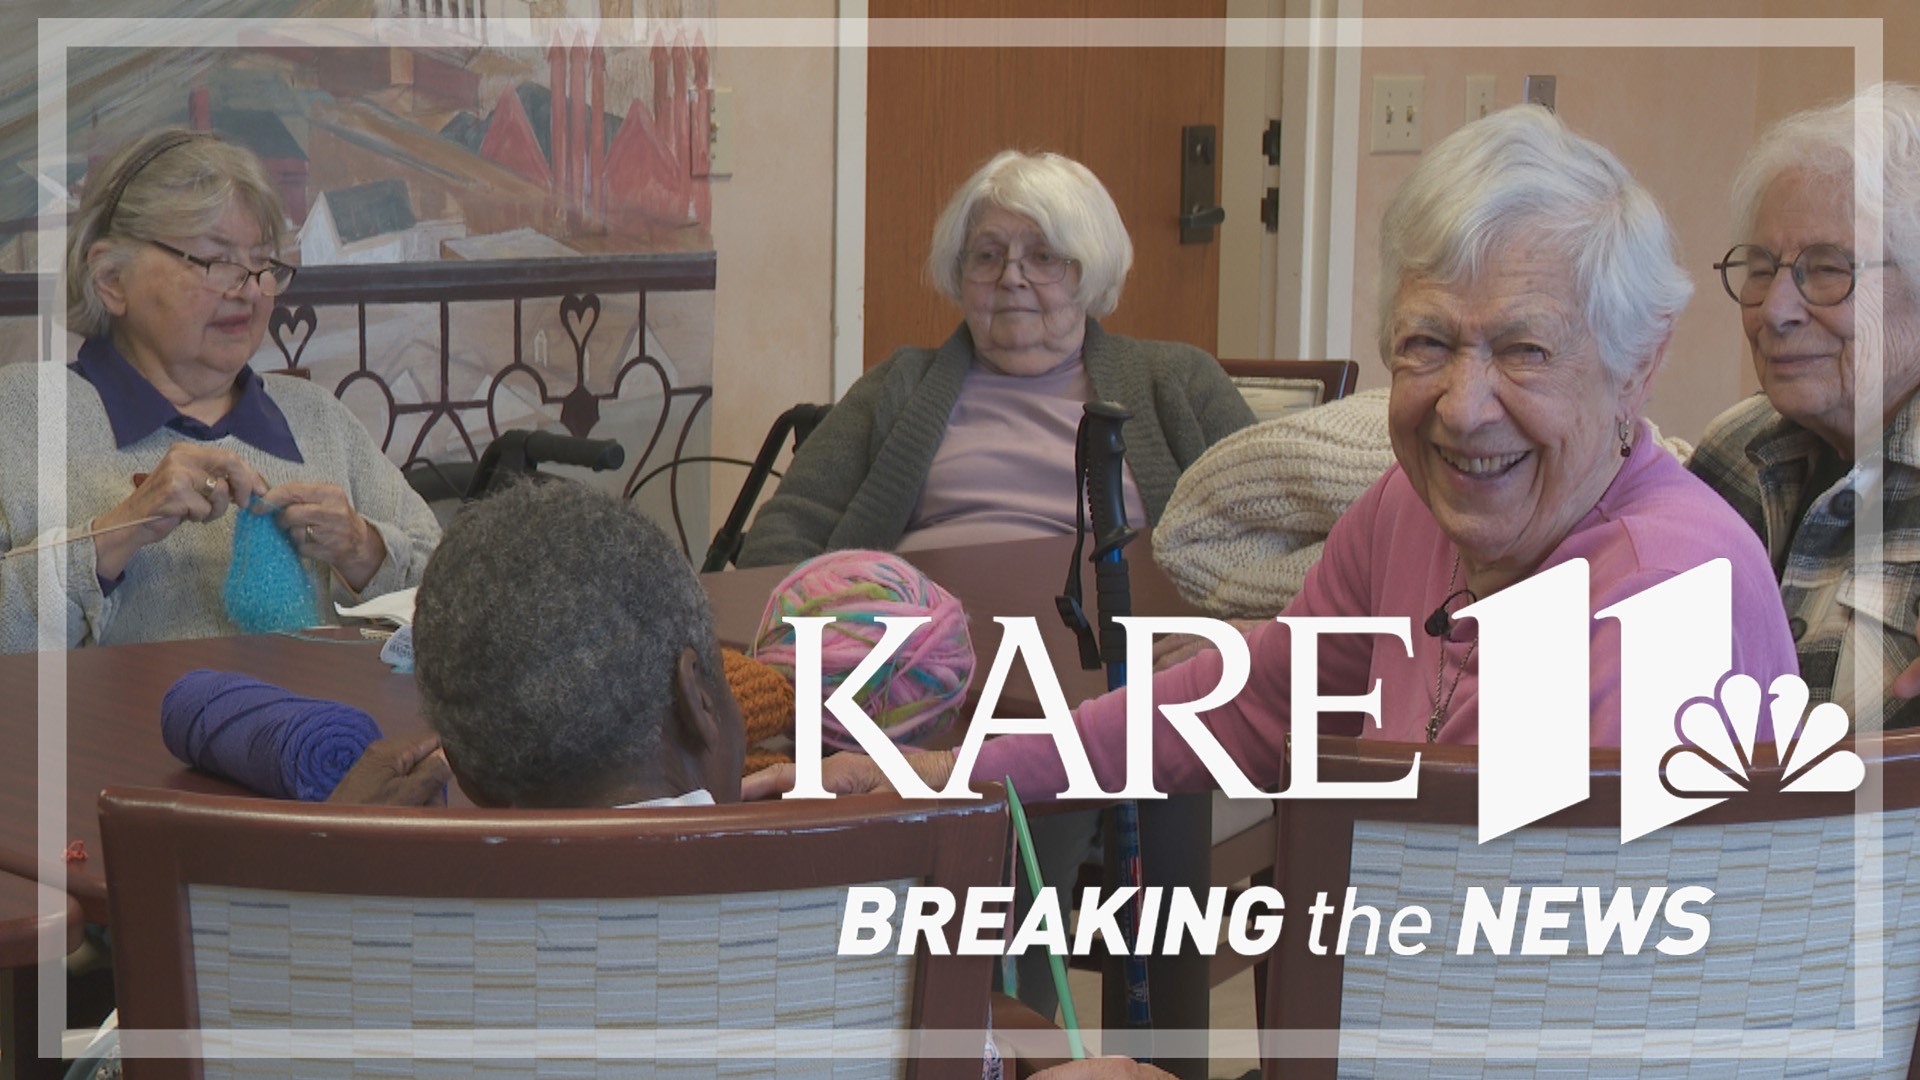 The group started in 2012, and has been doing community outreach through yarn ever since.